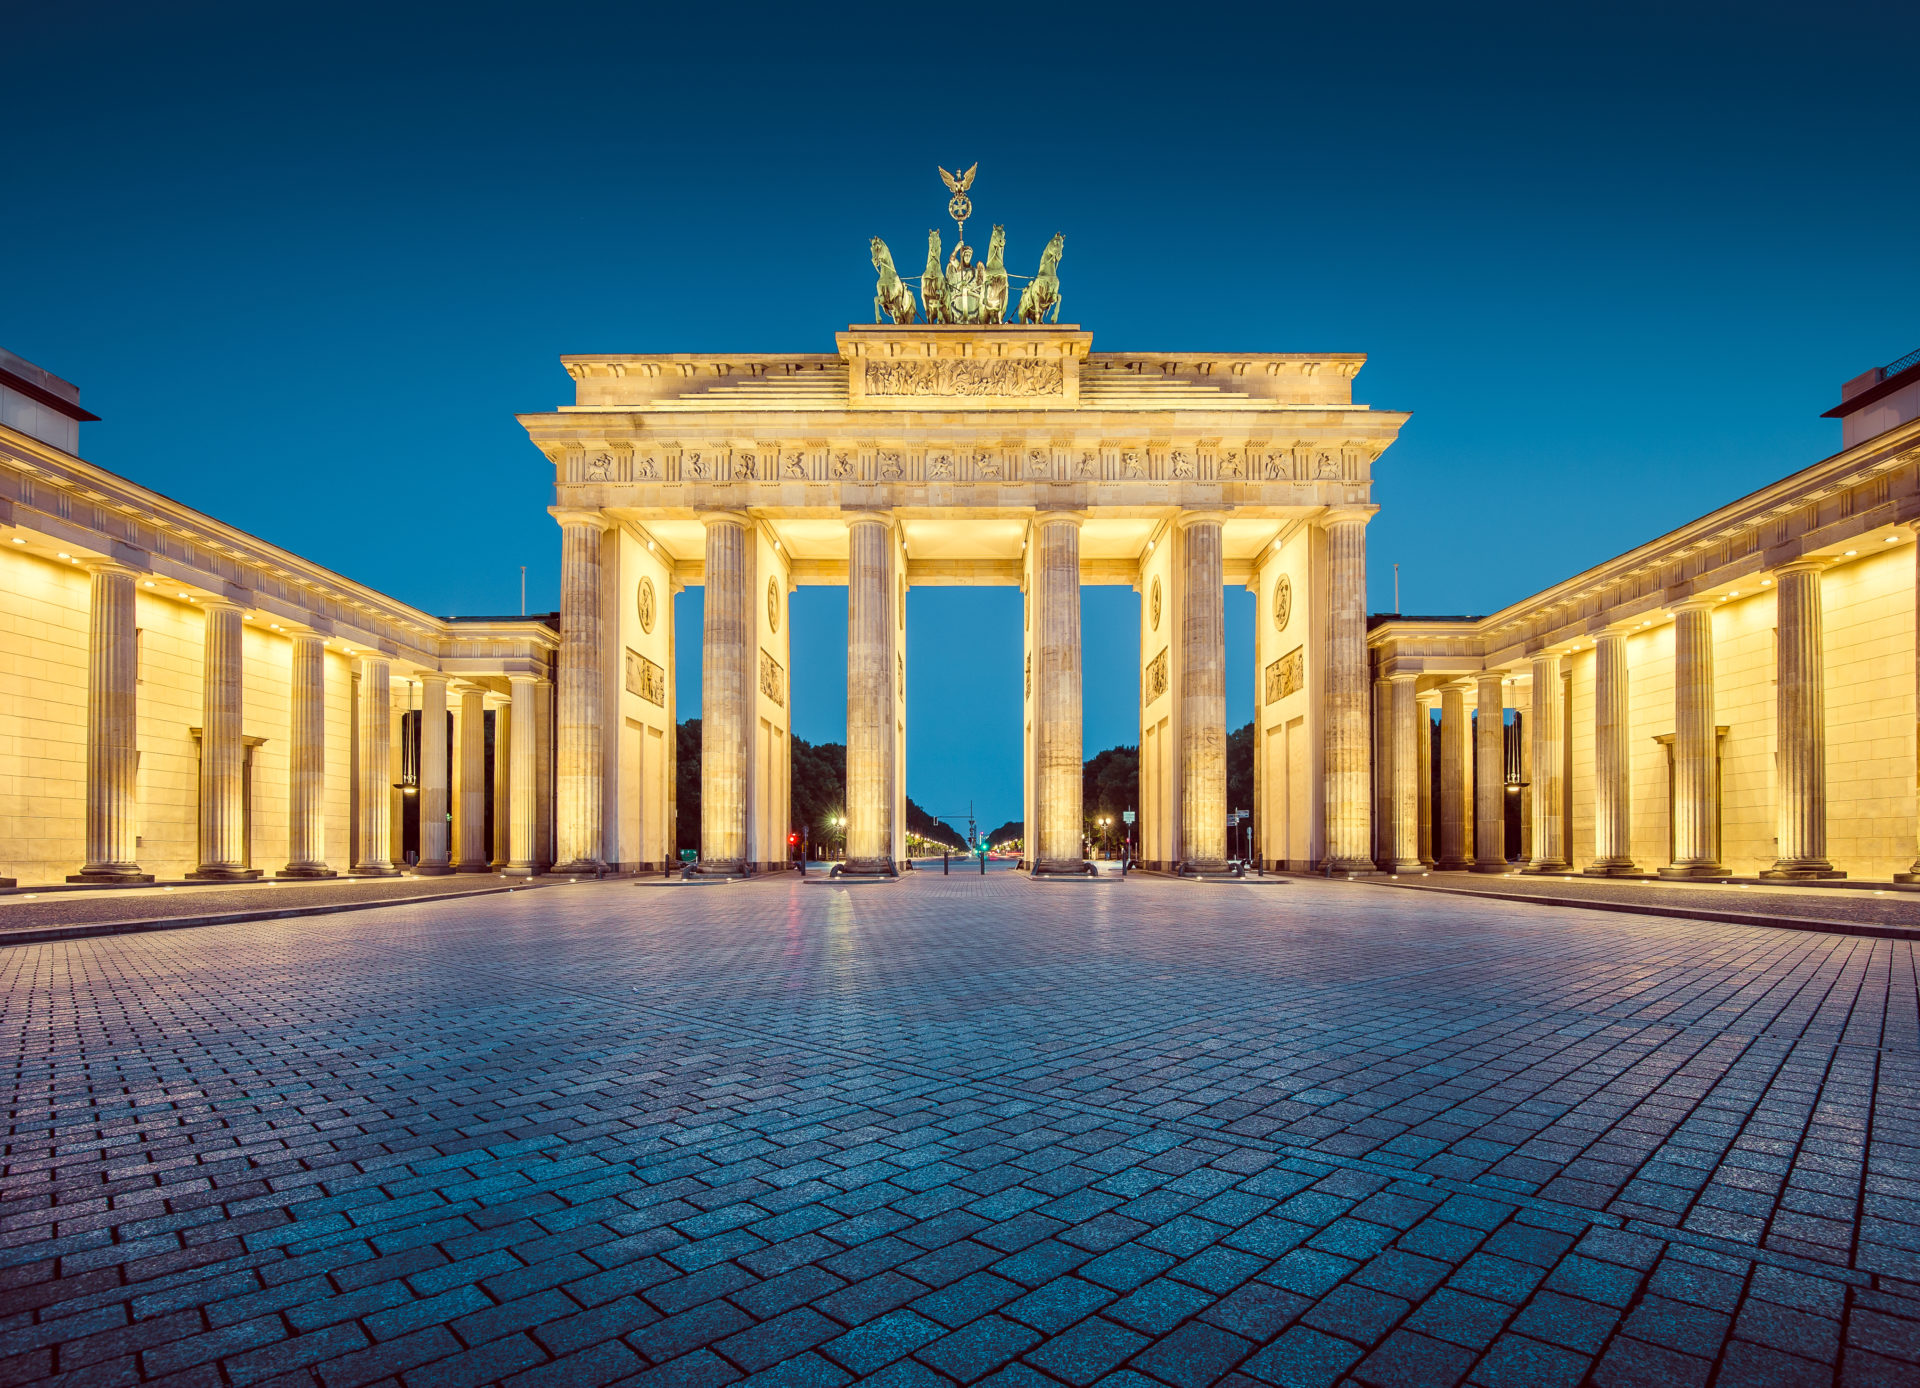 Berlin Is Rapidly Becoming a Hotspot for Blockchain and Cryptocurrency